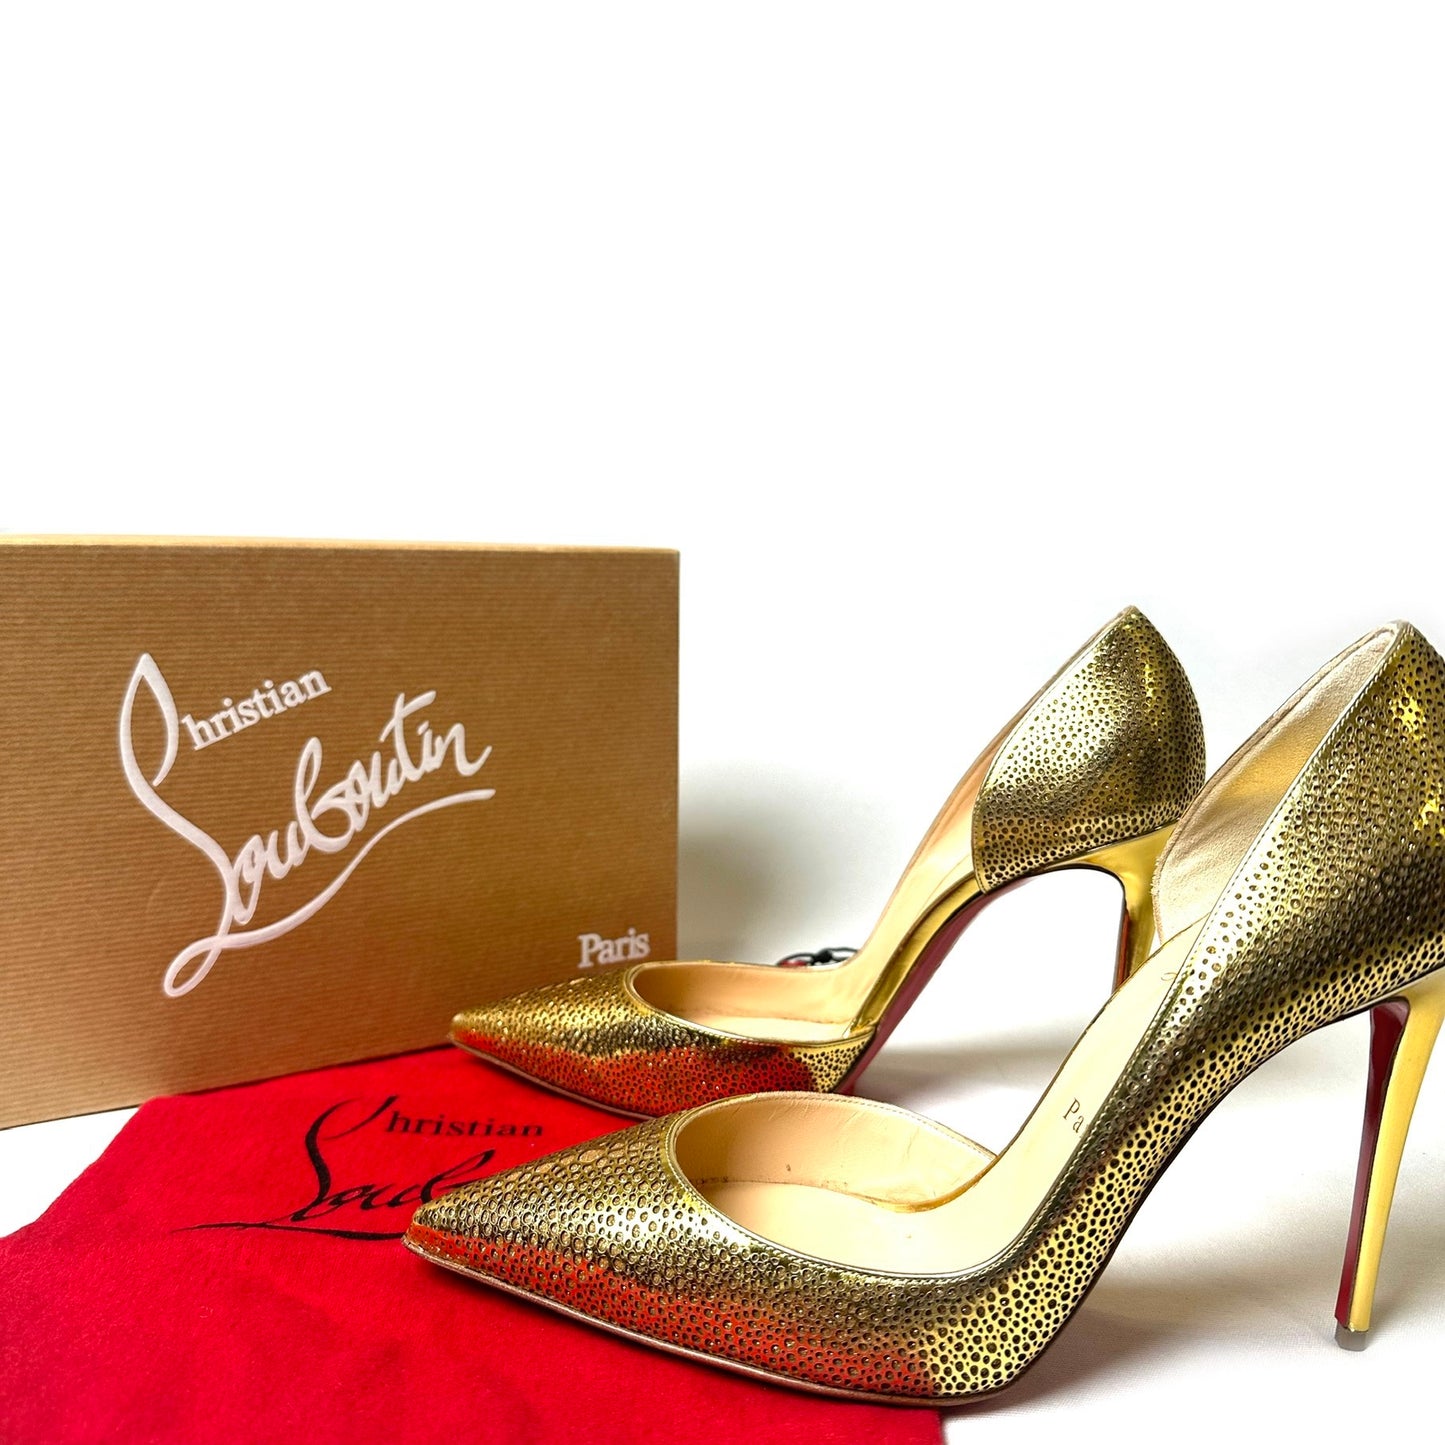 Christian Louboutin Golden Leather D'Orsay Pumps - Size 40.5